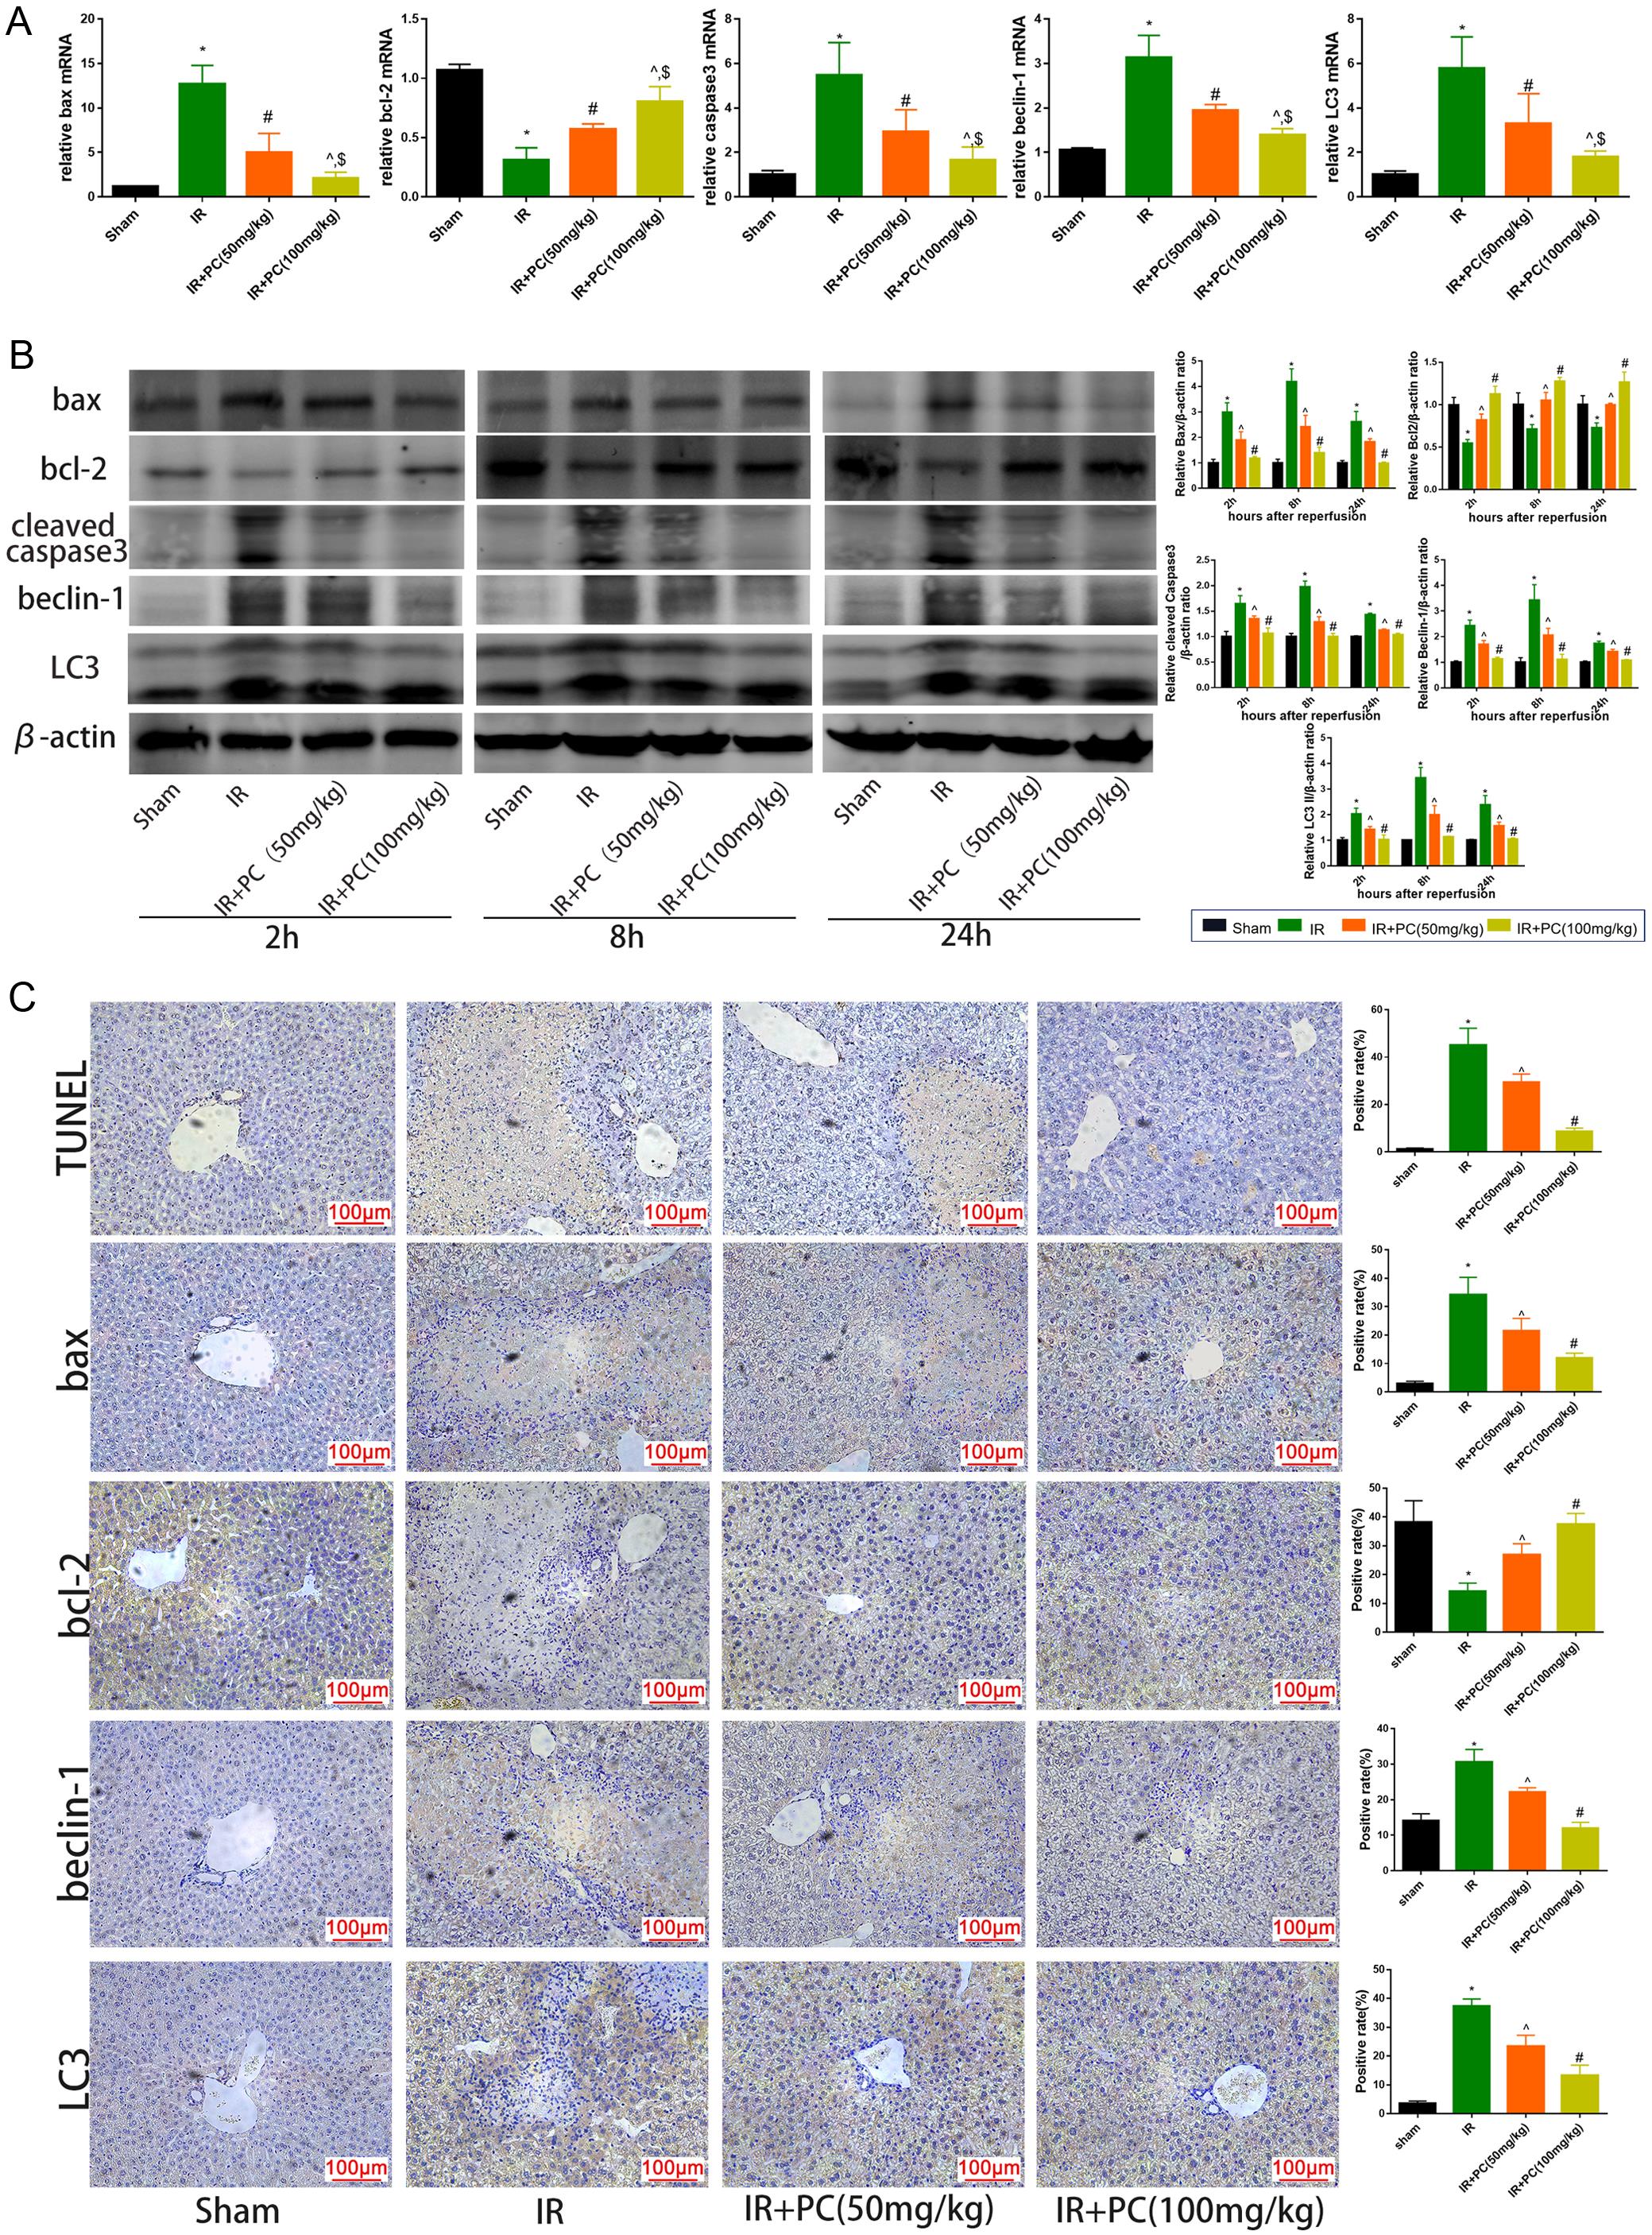 PC pretreatment attenuated hepatocyte apoptosis and autophagy during hepatic IRI in mice.